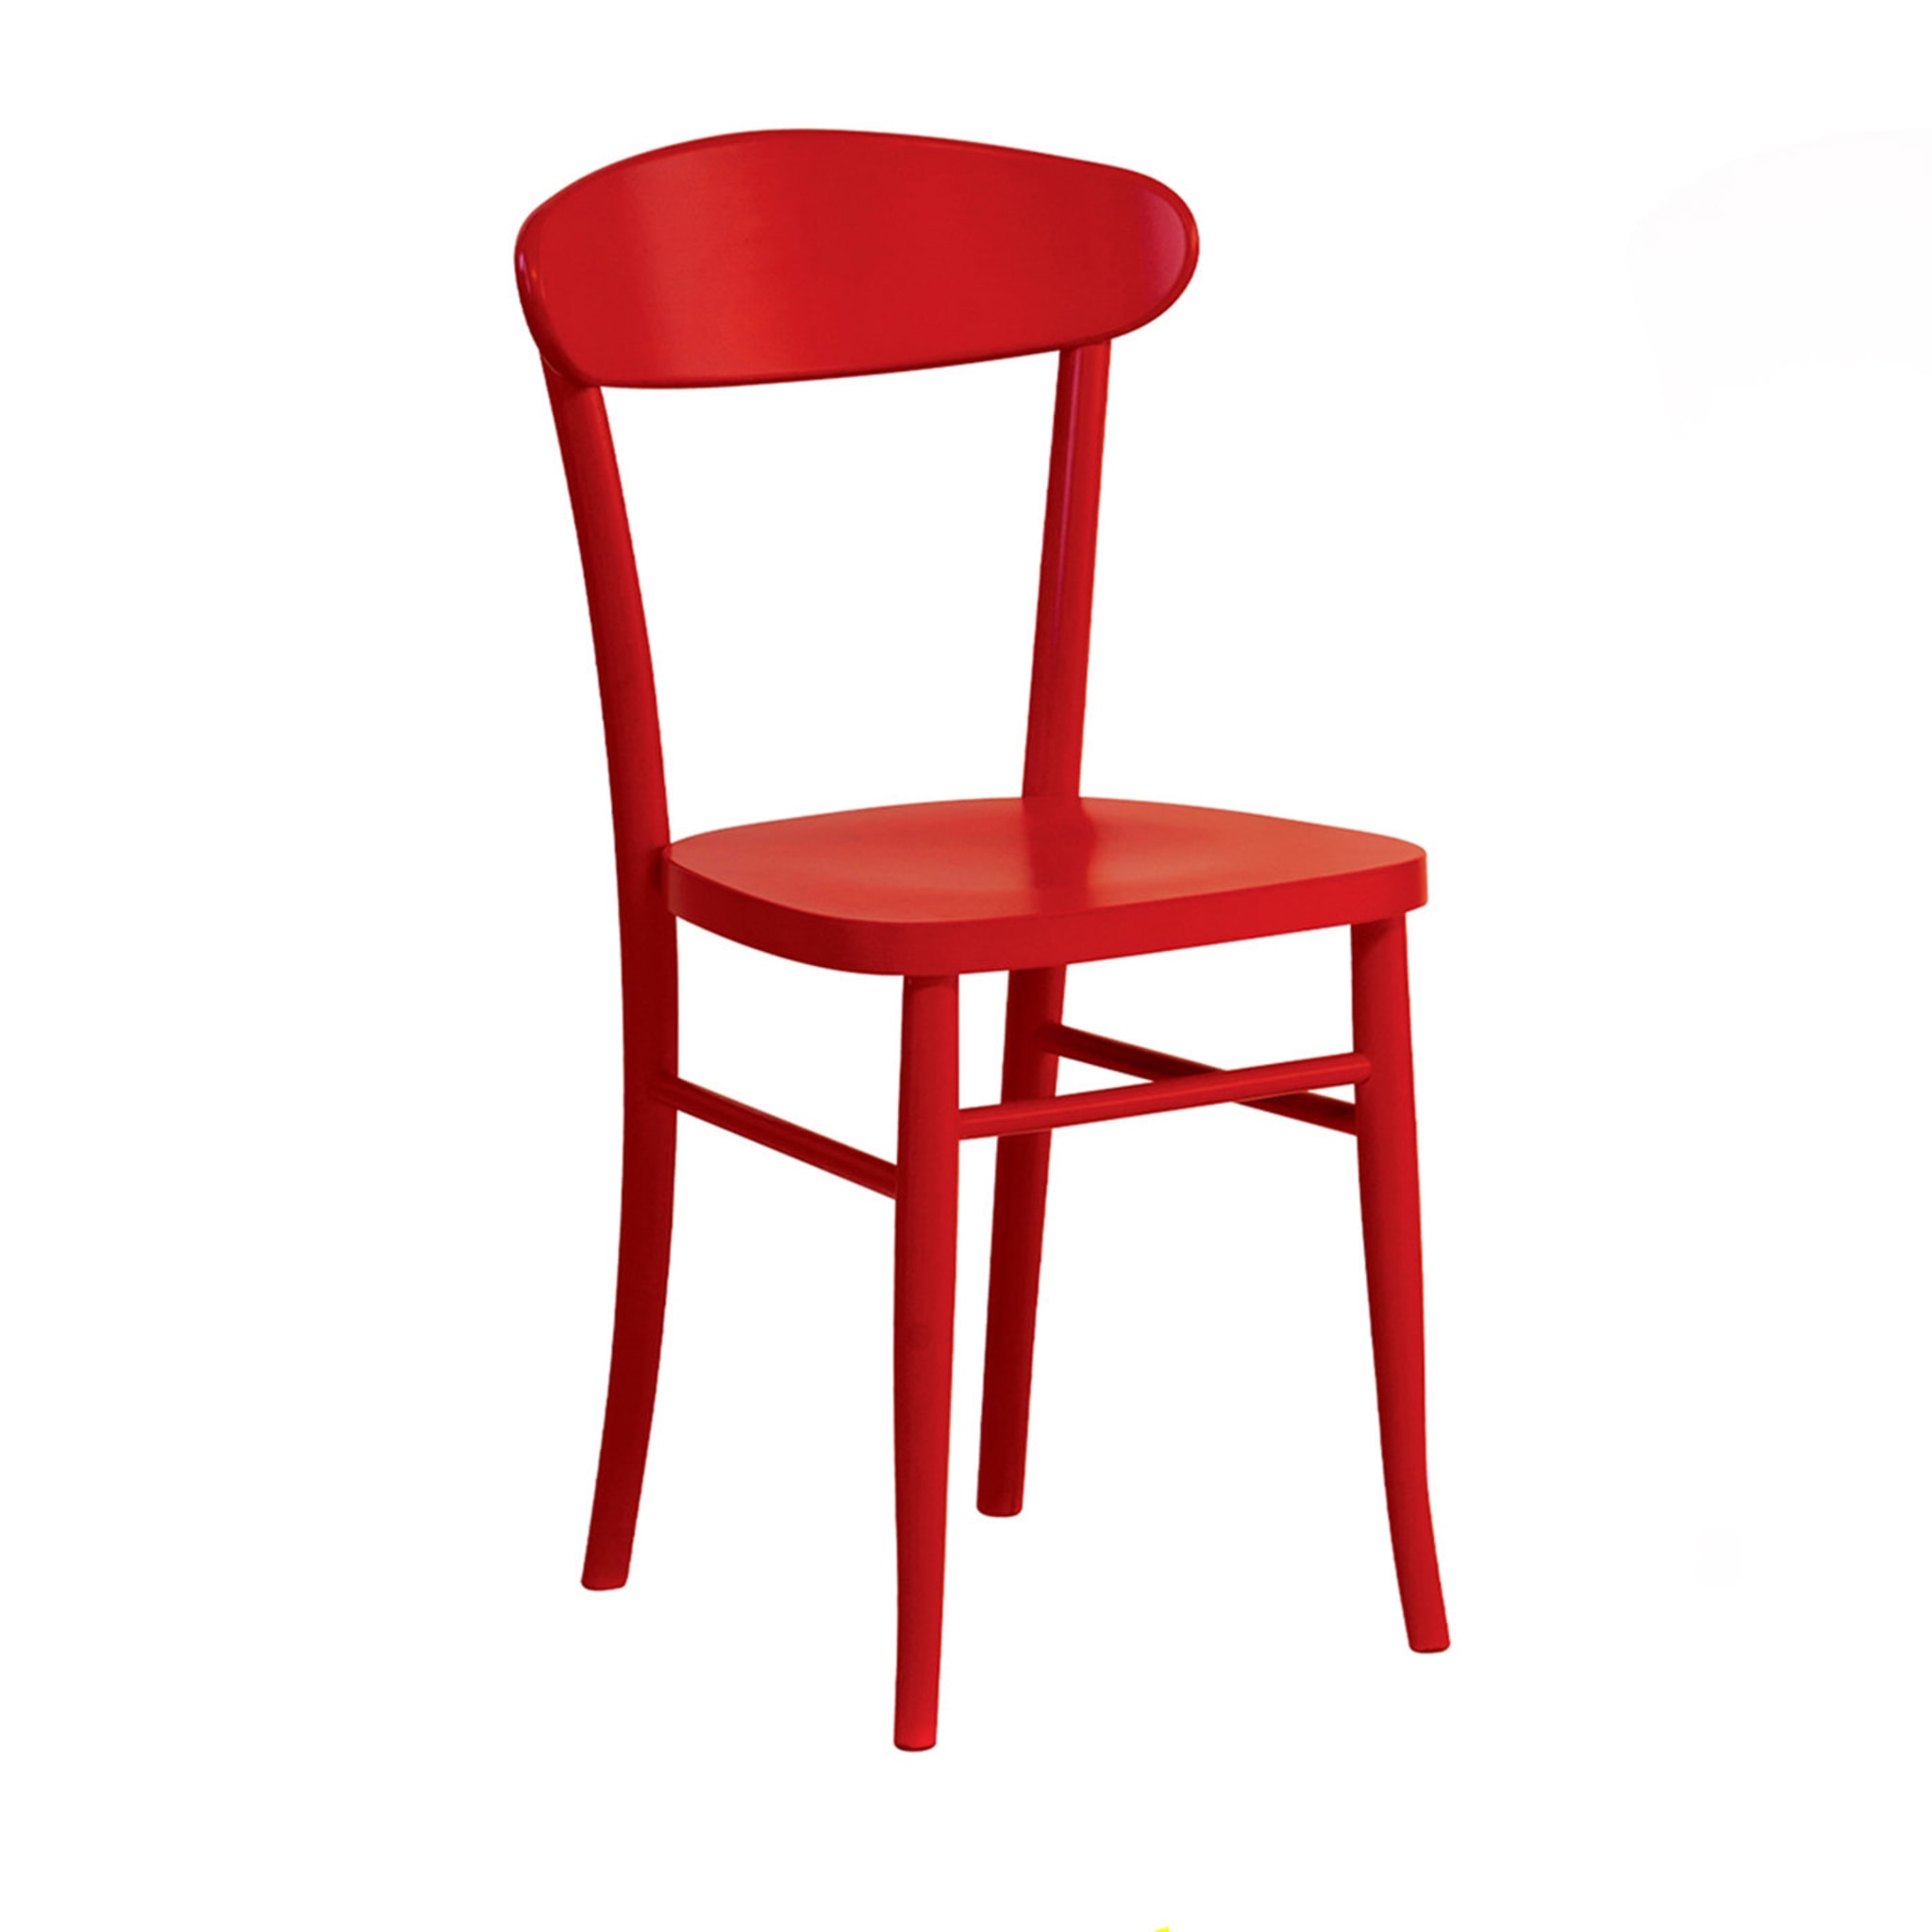 Pamela Set of 2 Red Chairs - Main view